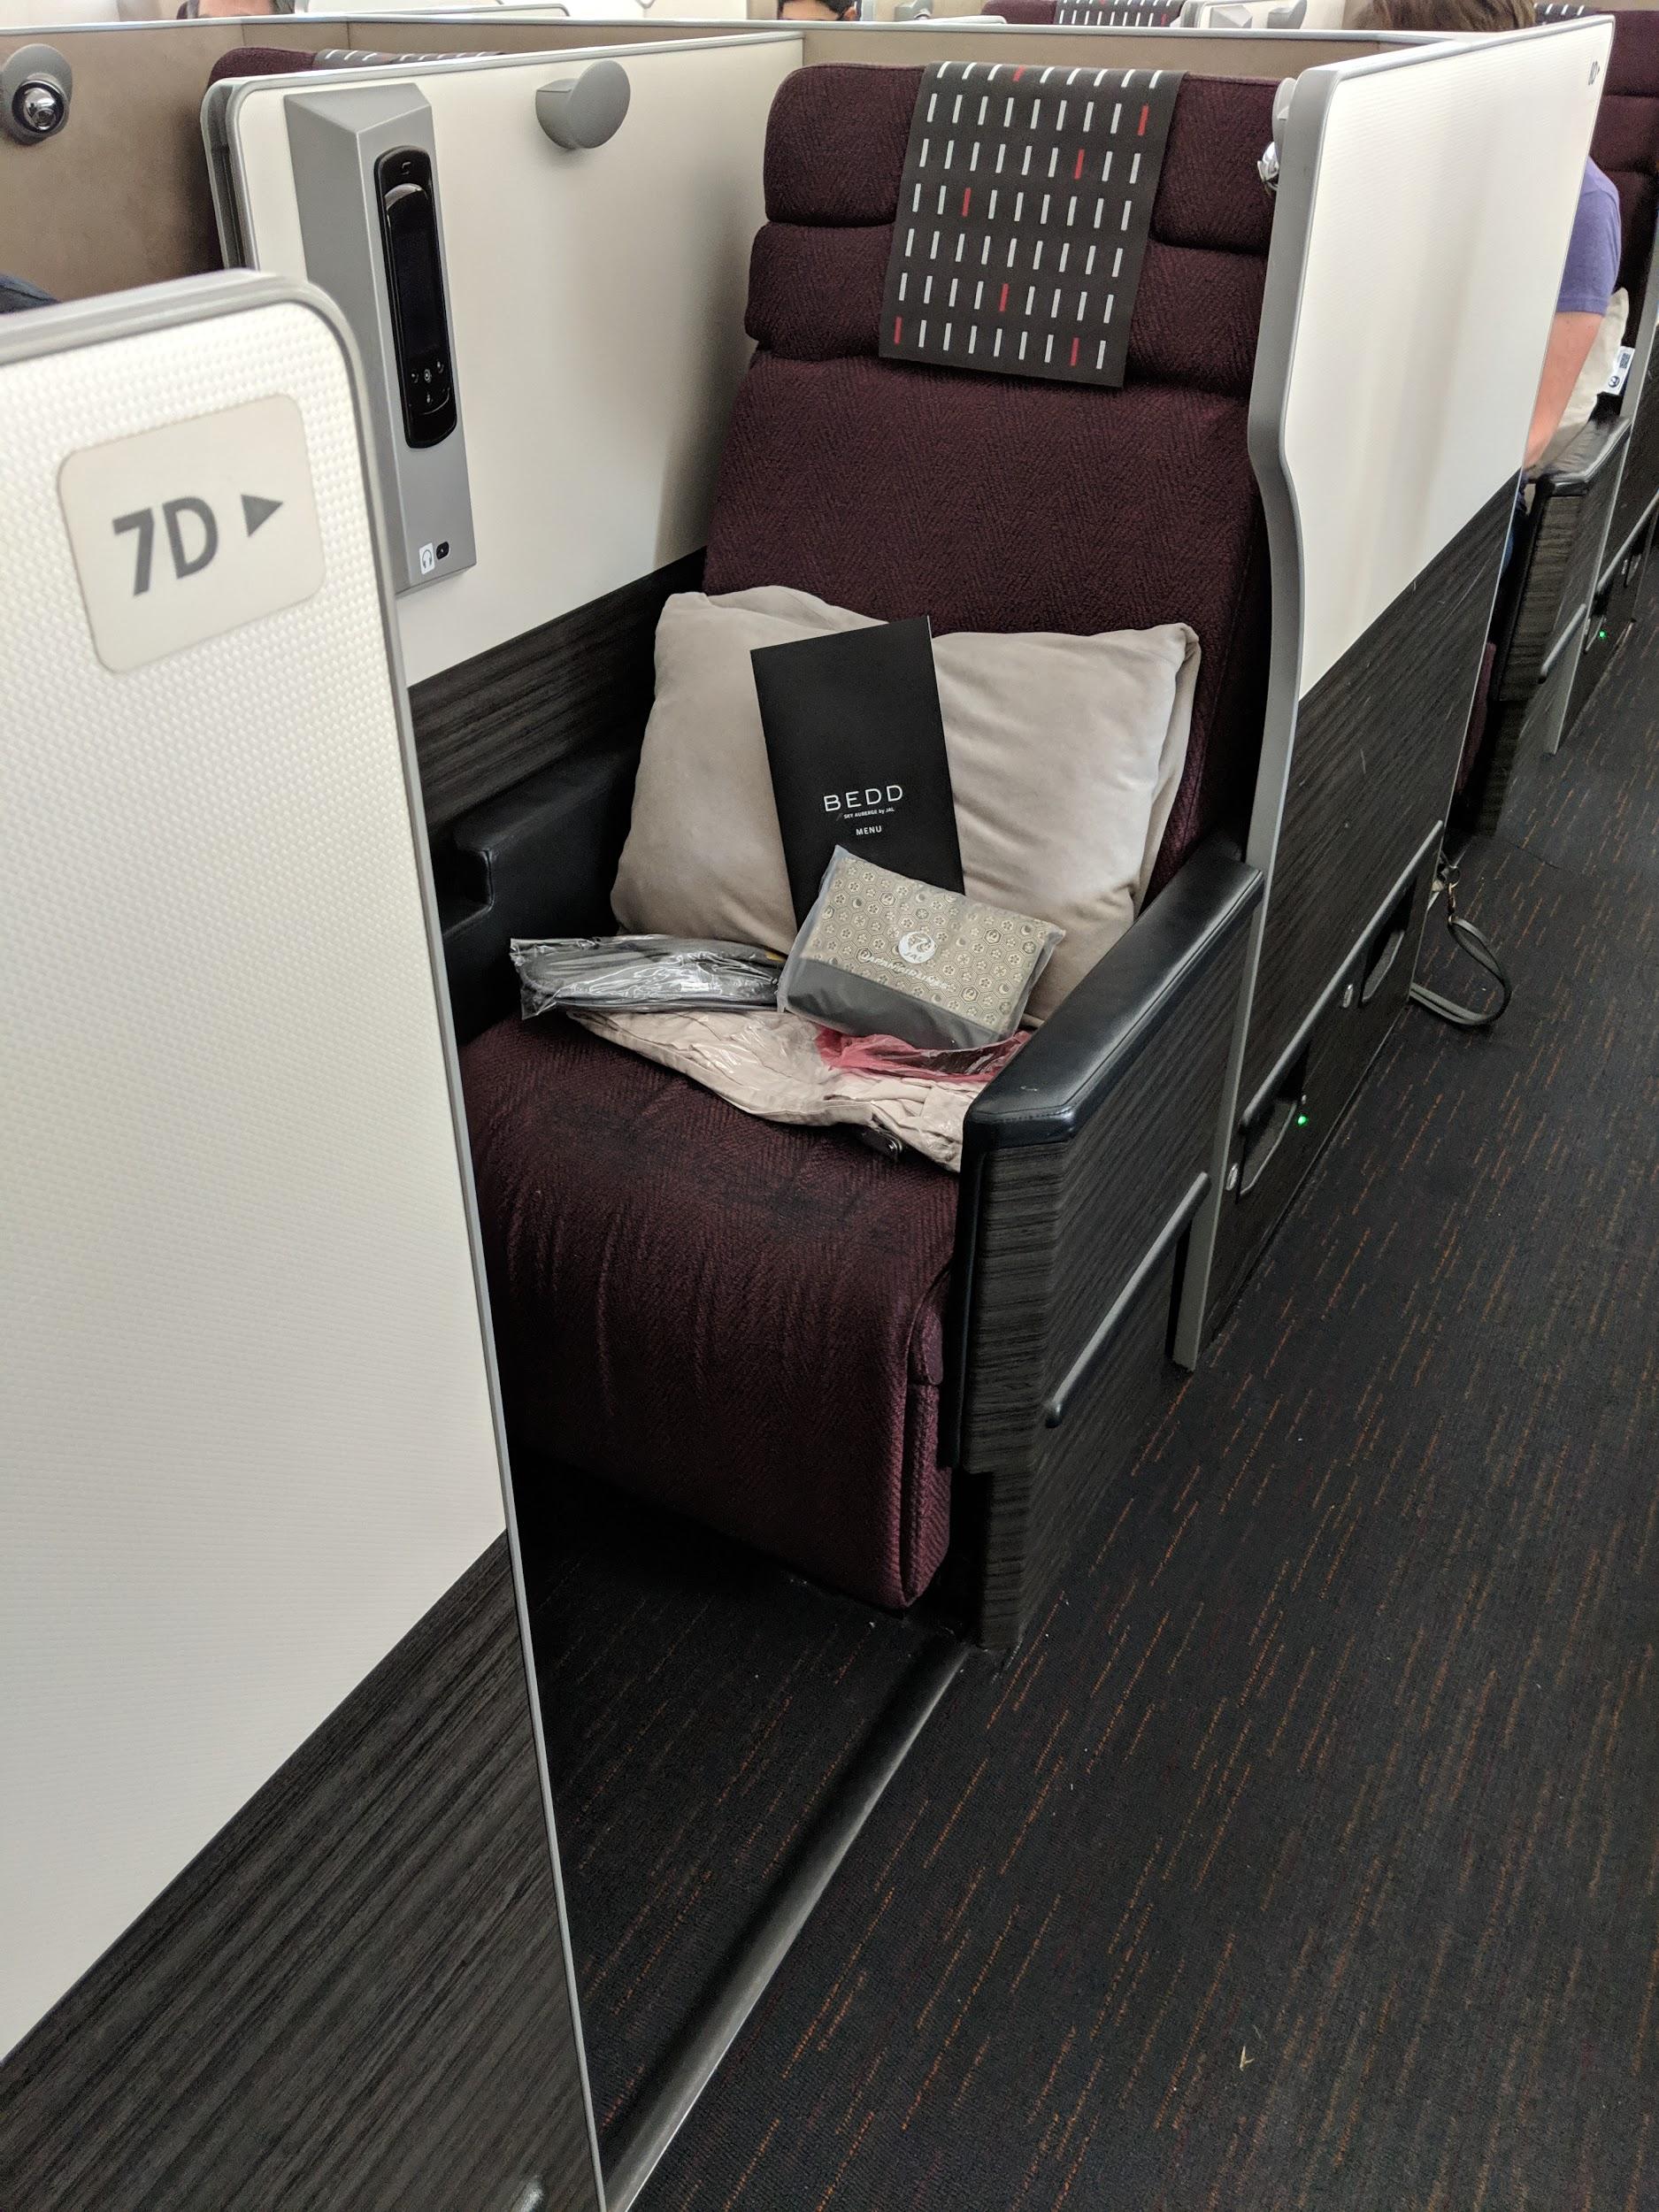 Japan Airlines 787 Business Class